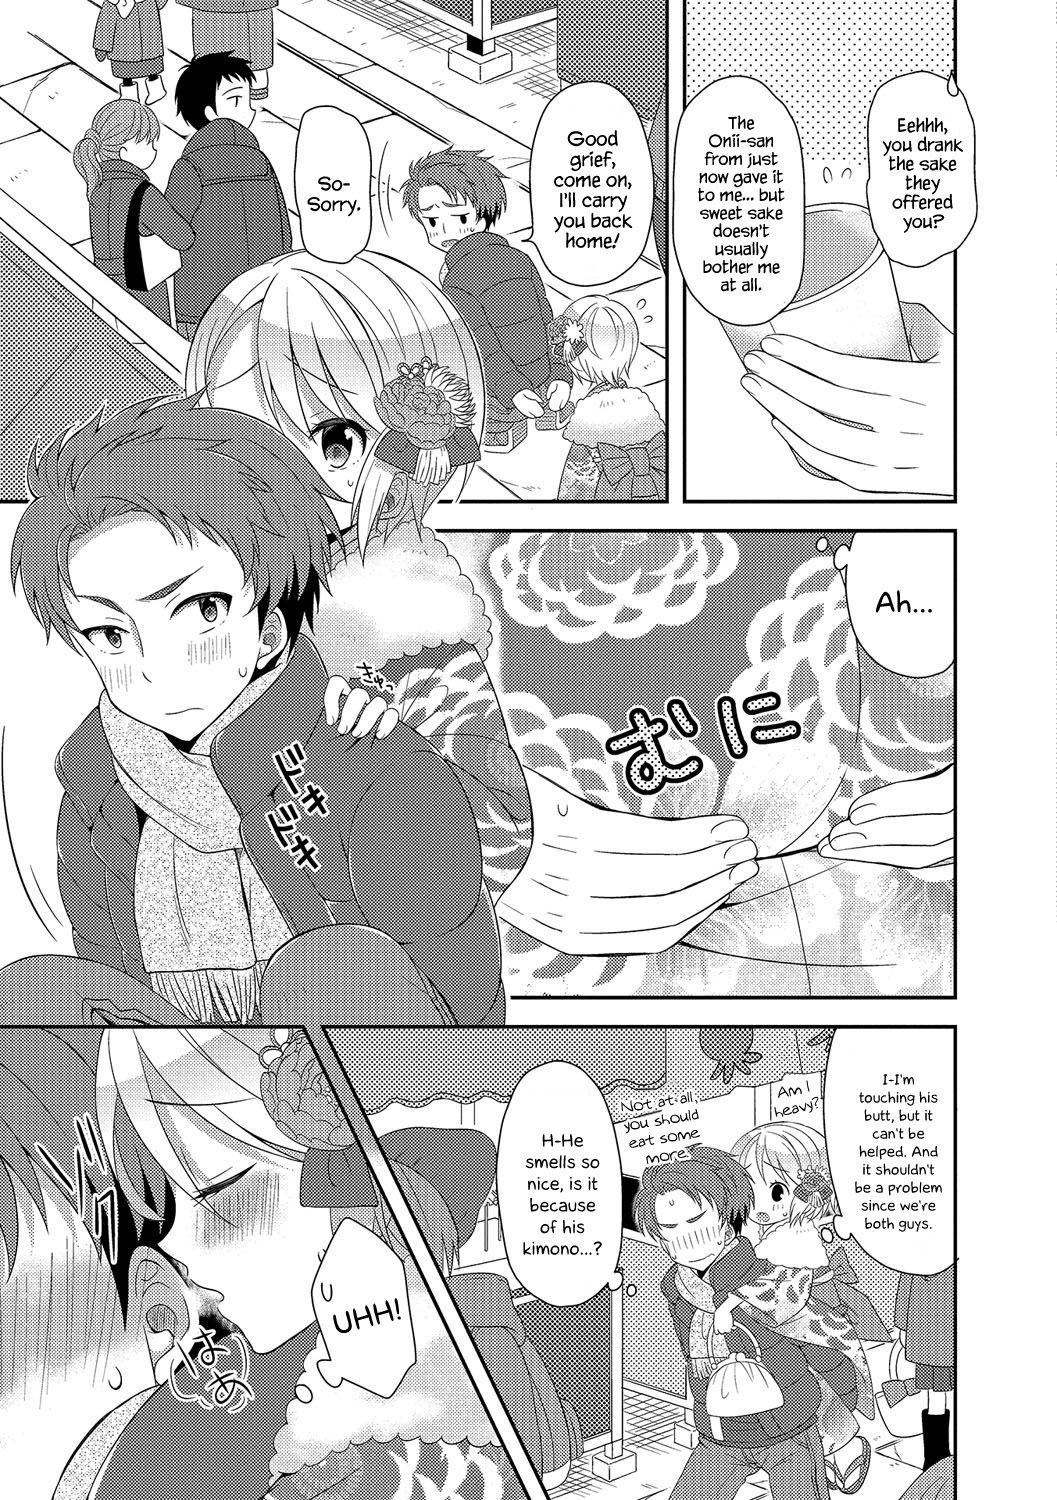 Tribute Hatsumoude no Ohimesama | The Princess of the New Year Visit Screaming - Page 3